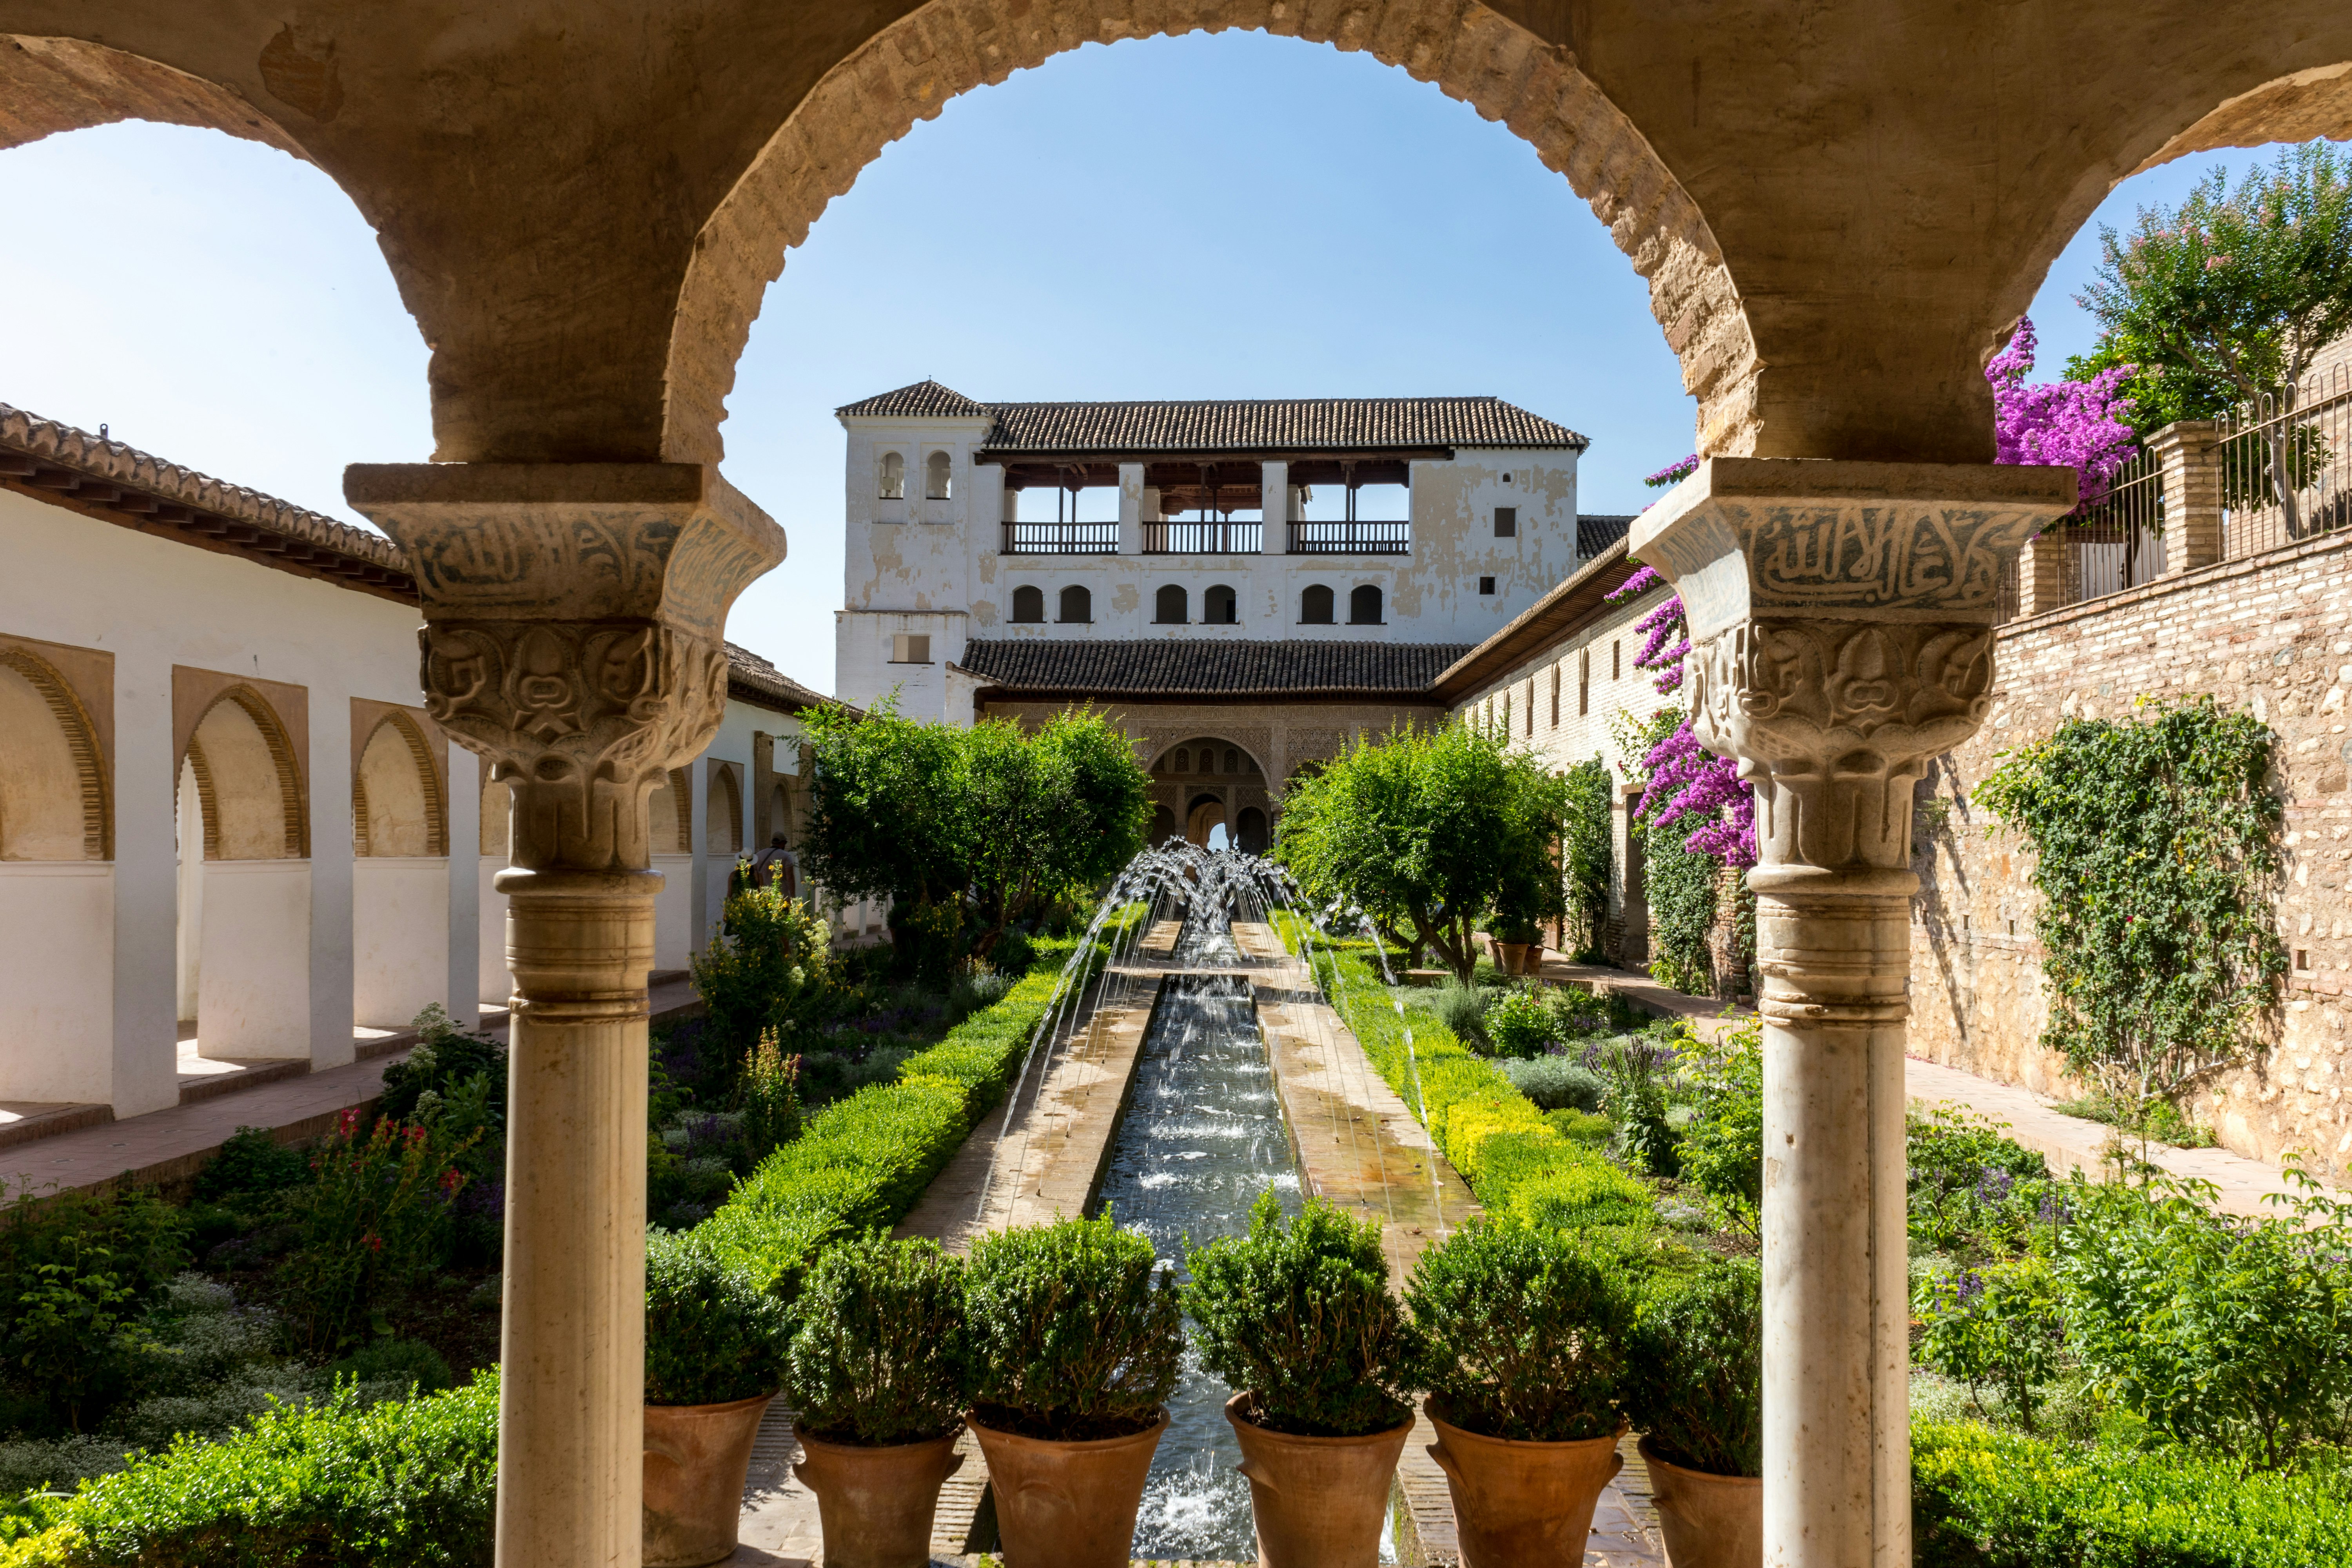 Looking between the columns of an archway in a palace, towards a walled garden. There are lush green plants and a long, narrow, rectangular pond with fountains arcing over it.